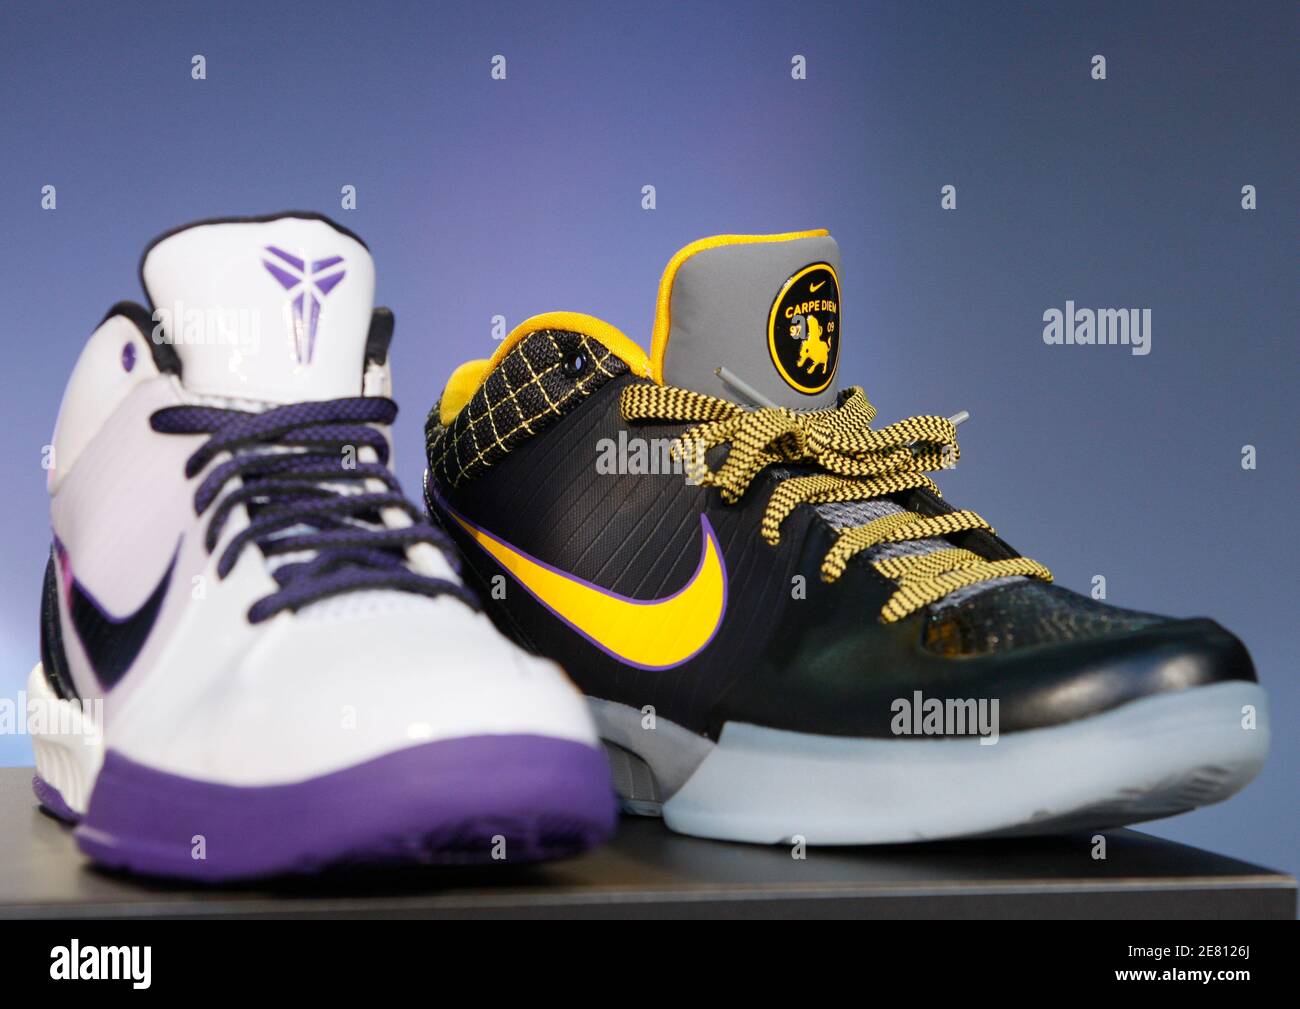 Los Angeles Lakers NBA star Kobe Bryant's new Nike Zoom Kobe IV basketball  shoe is shown in Los Angeles, December 11, 2008. The shoe will be available  for sale in China from